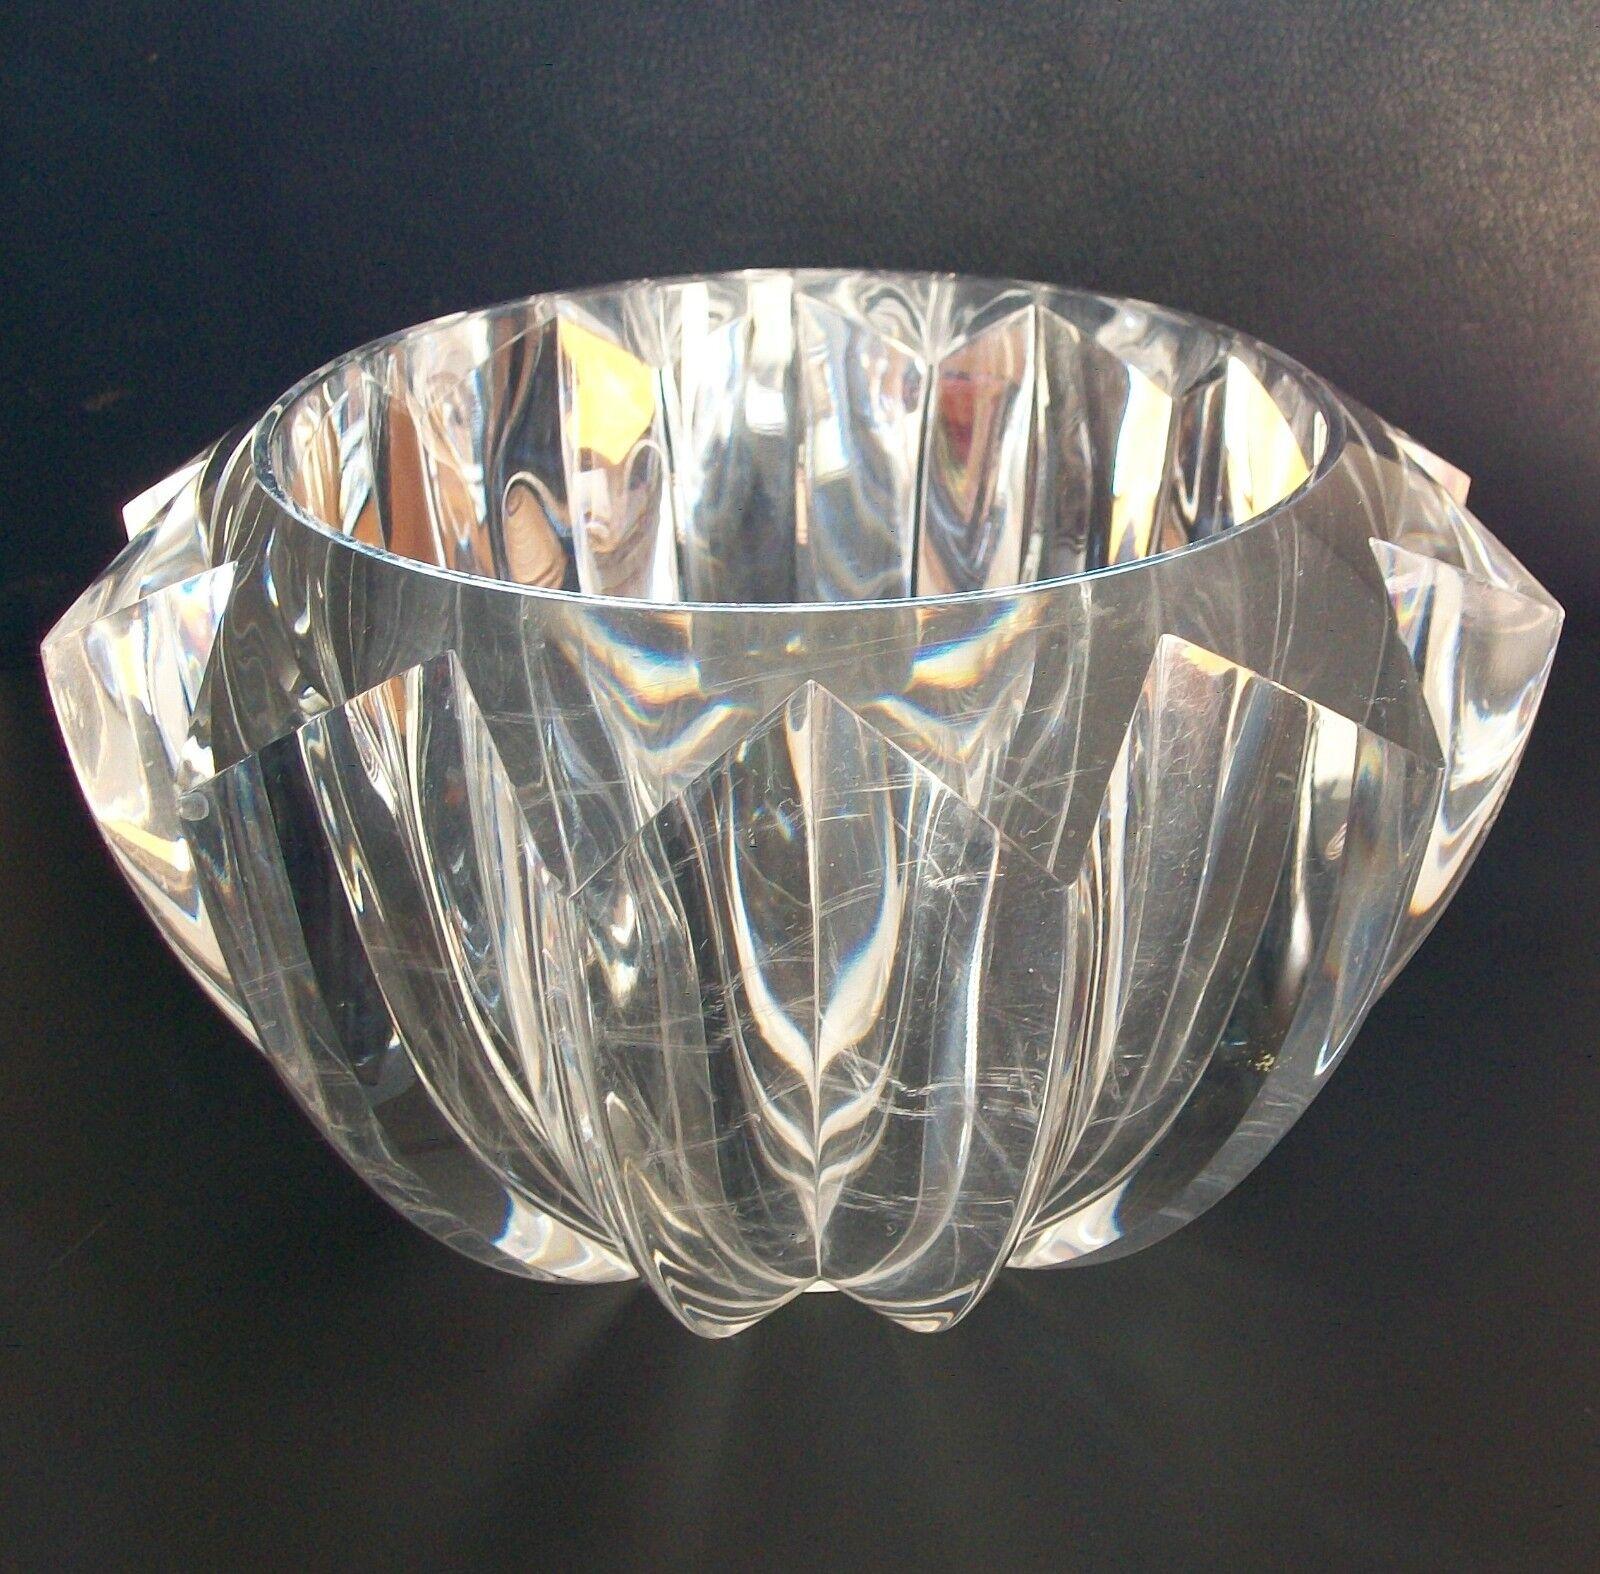 Molded Mid-Century Modern Faceted Lucite Bowl, Unsigned, United States, Circa 1970's For Sale